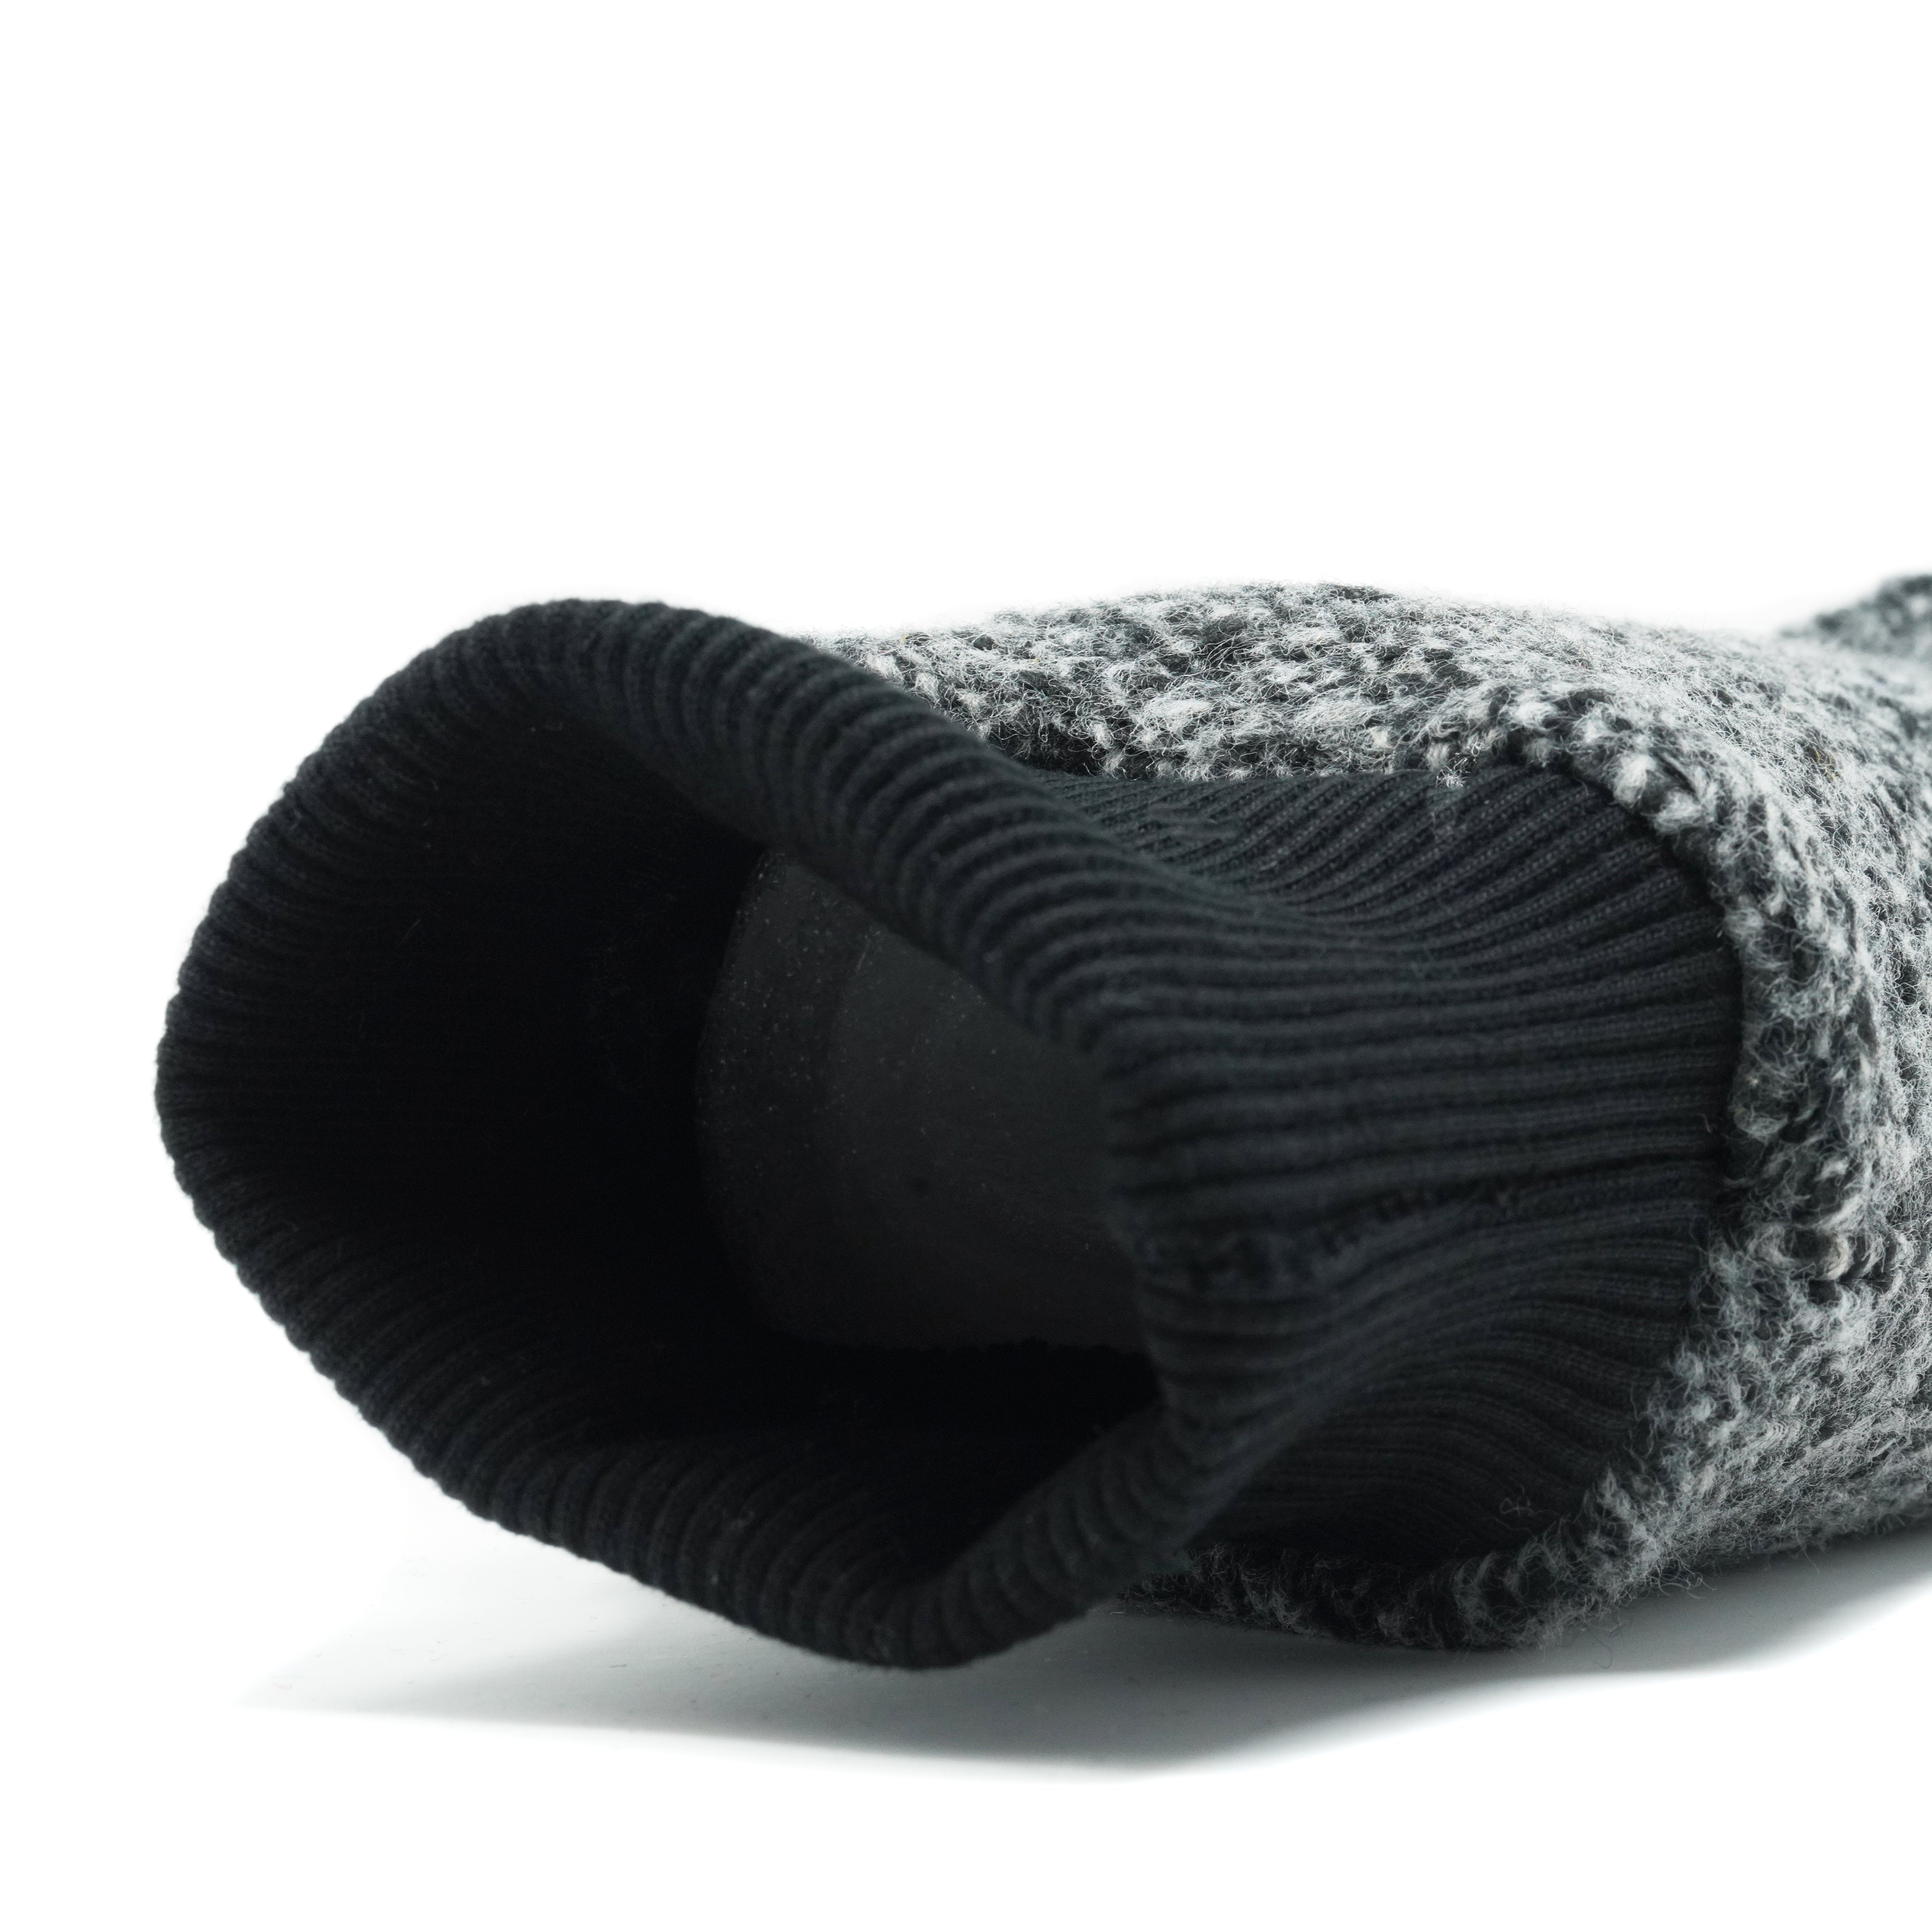 MITTENS - LIMITED EDITION - Gray Melange